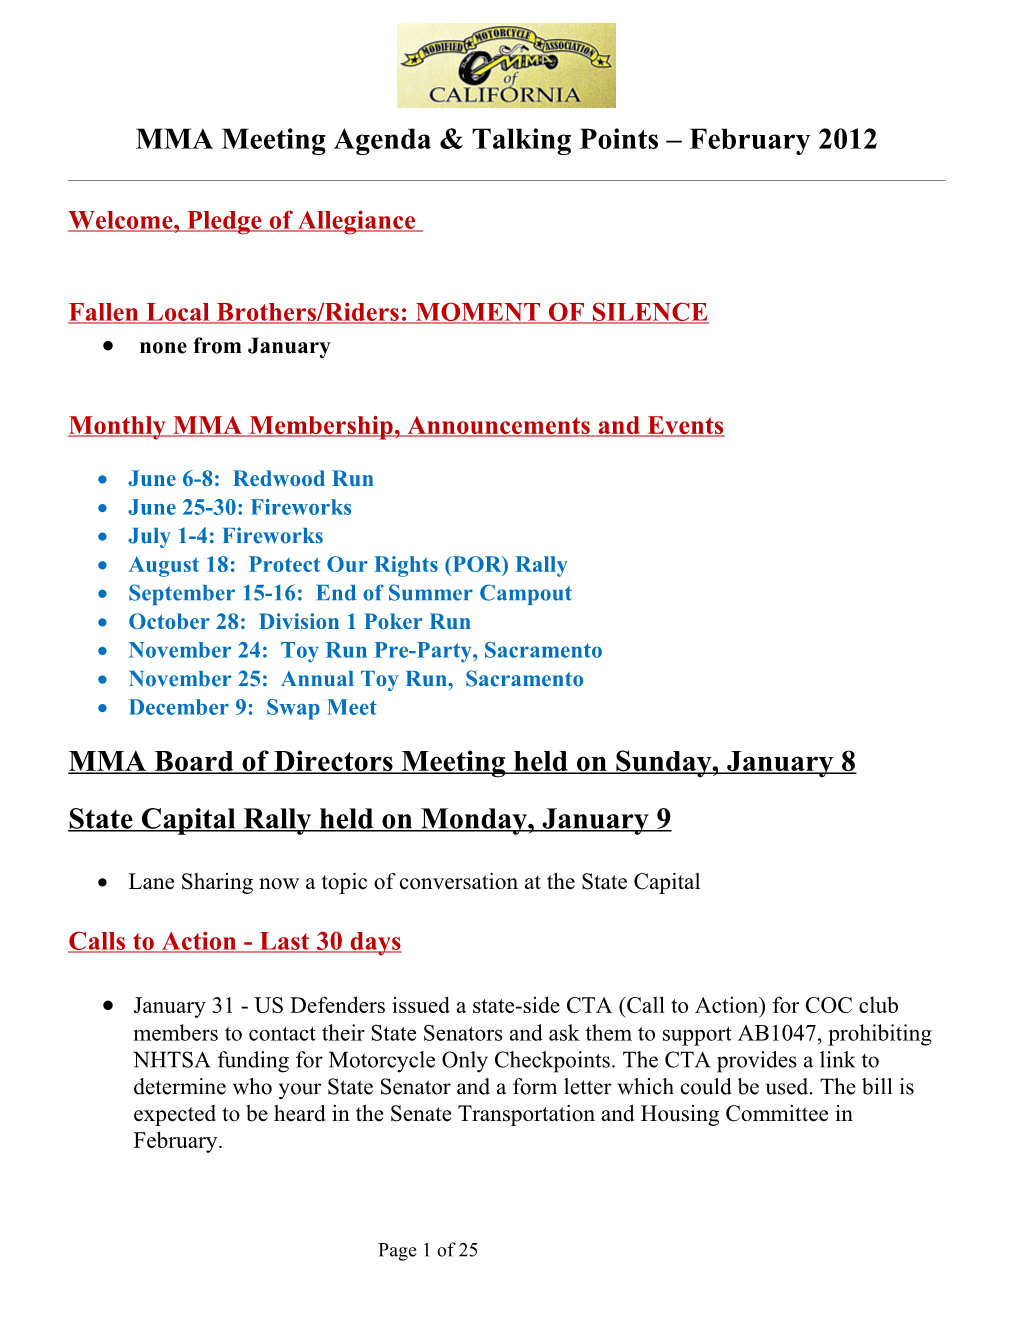 MMA Meeting Talking Points February 2011